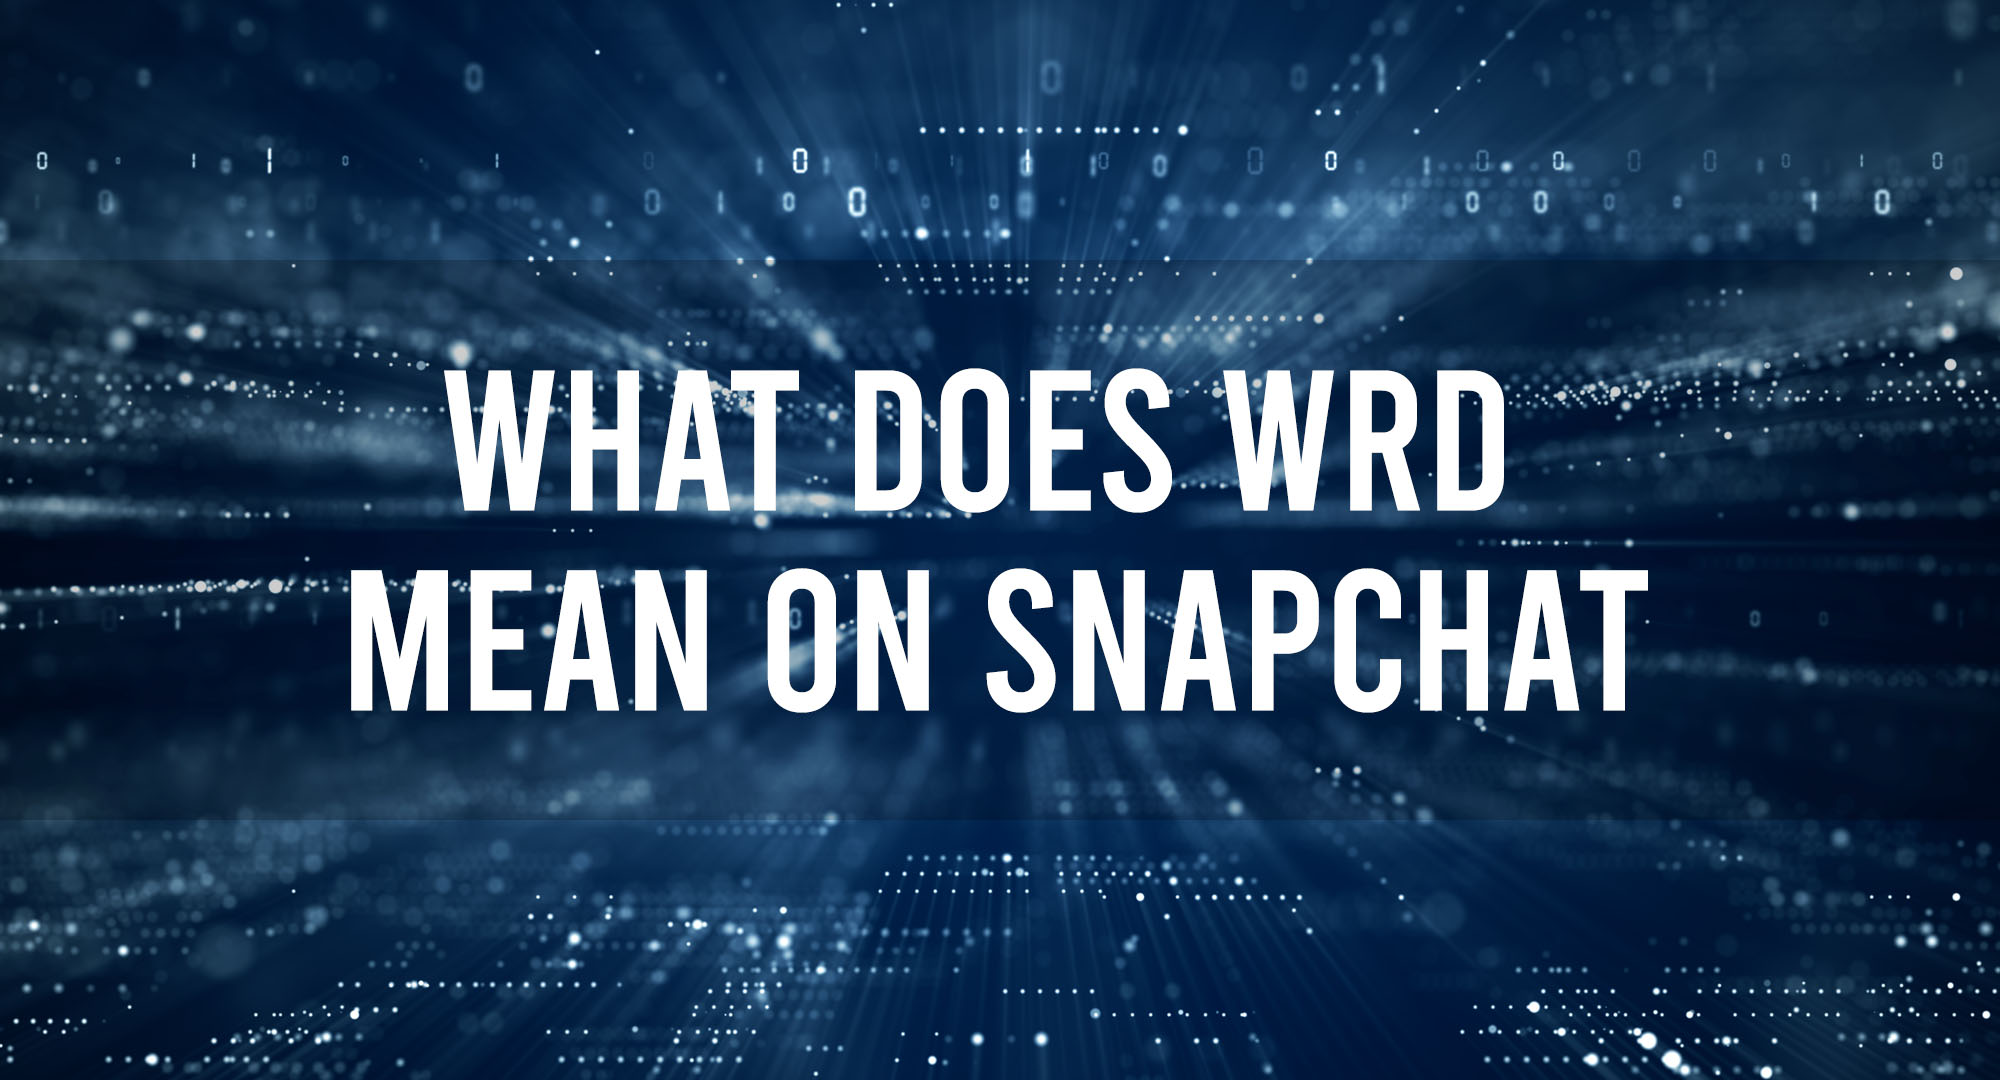 What does WRD mean on snapchat